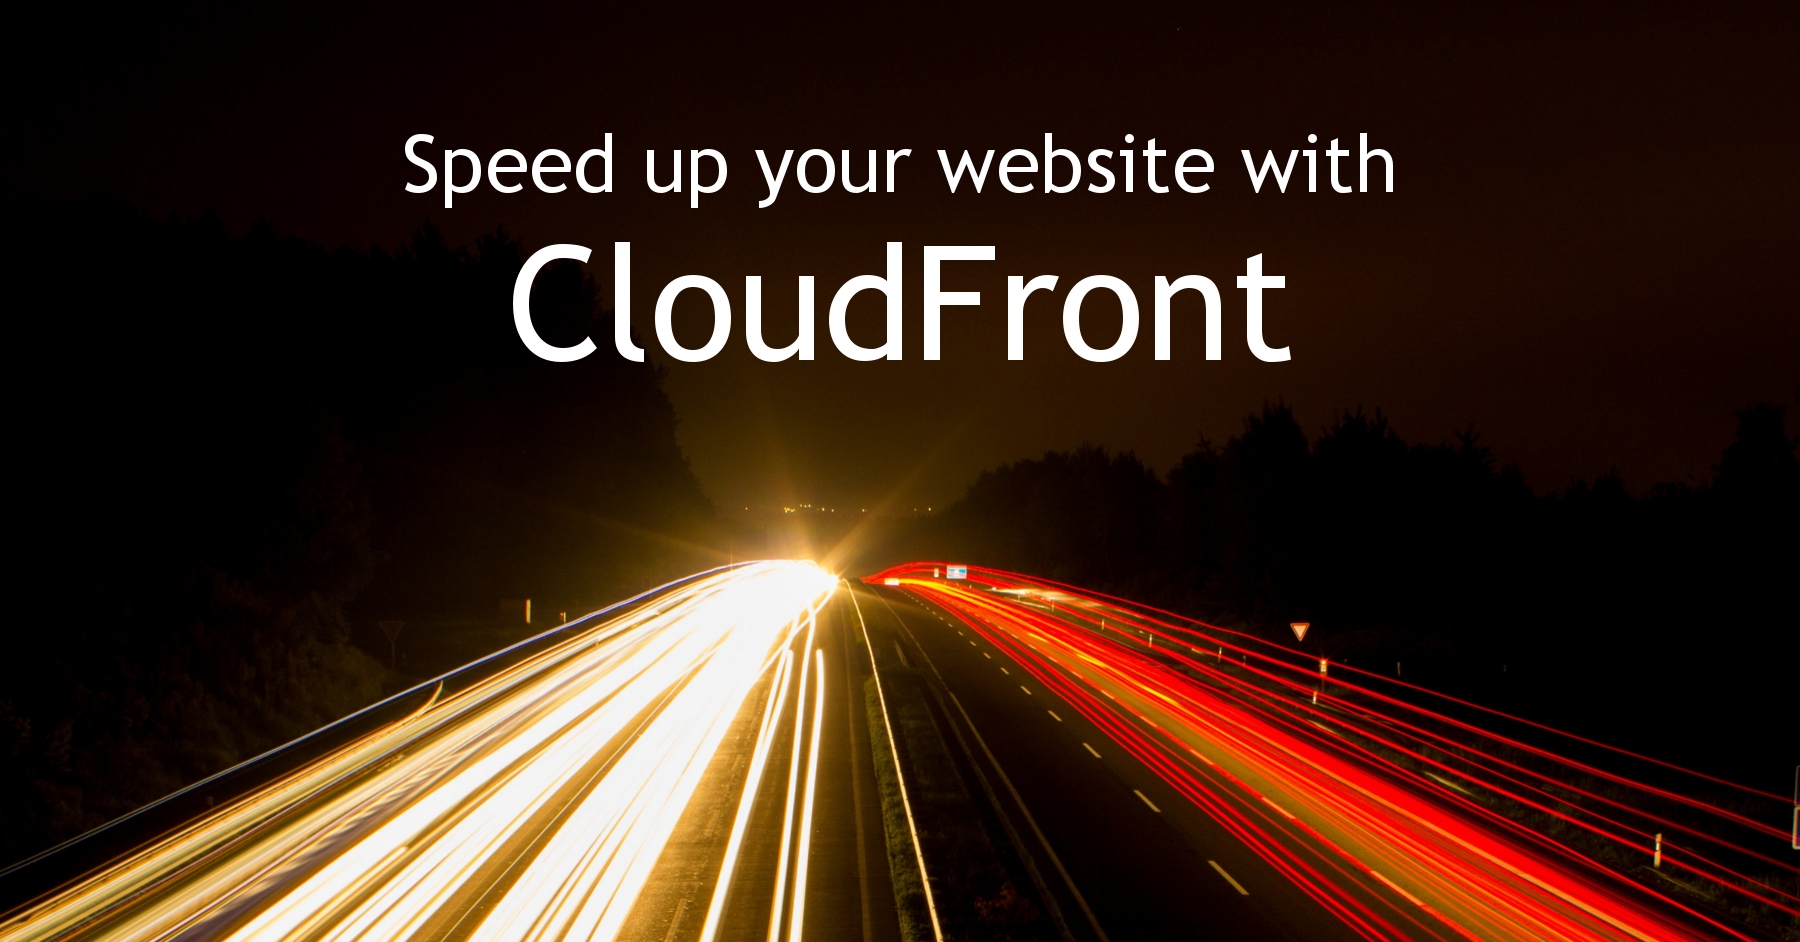 Speed up your website with CloudFront